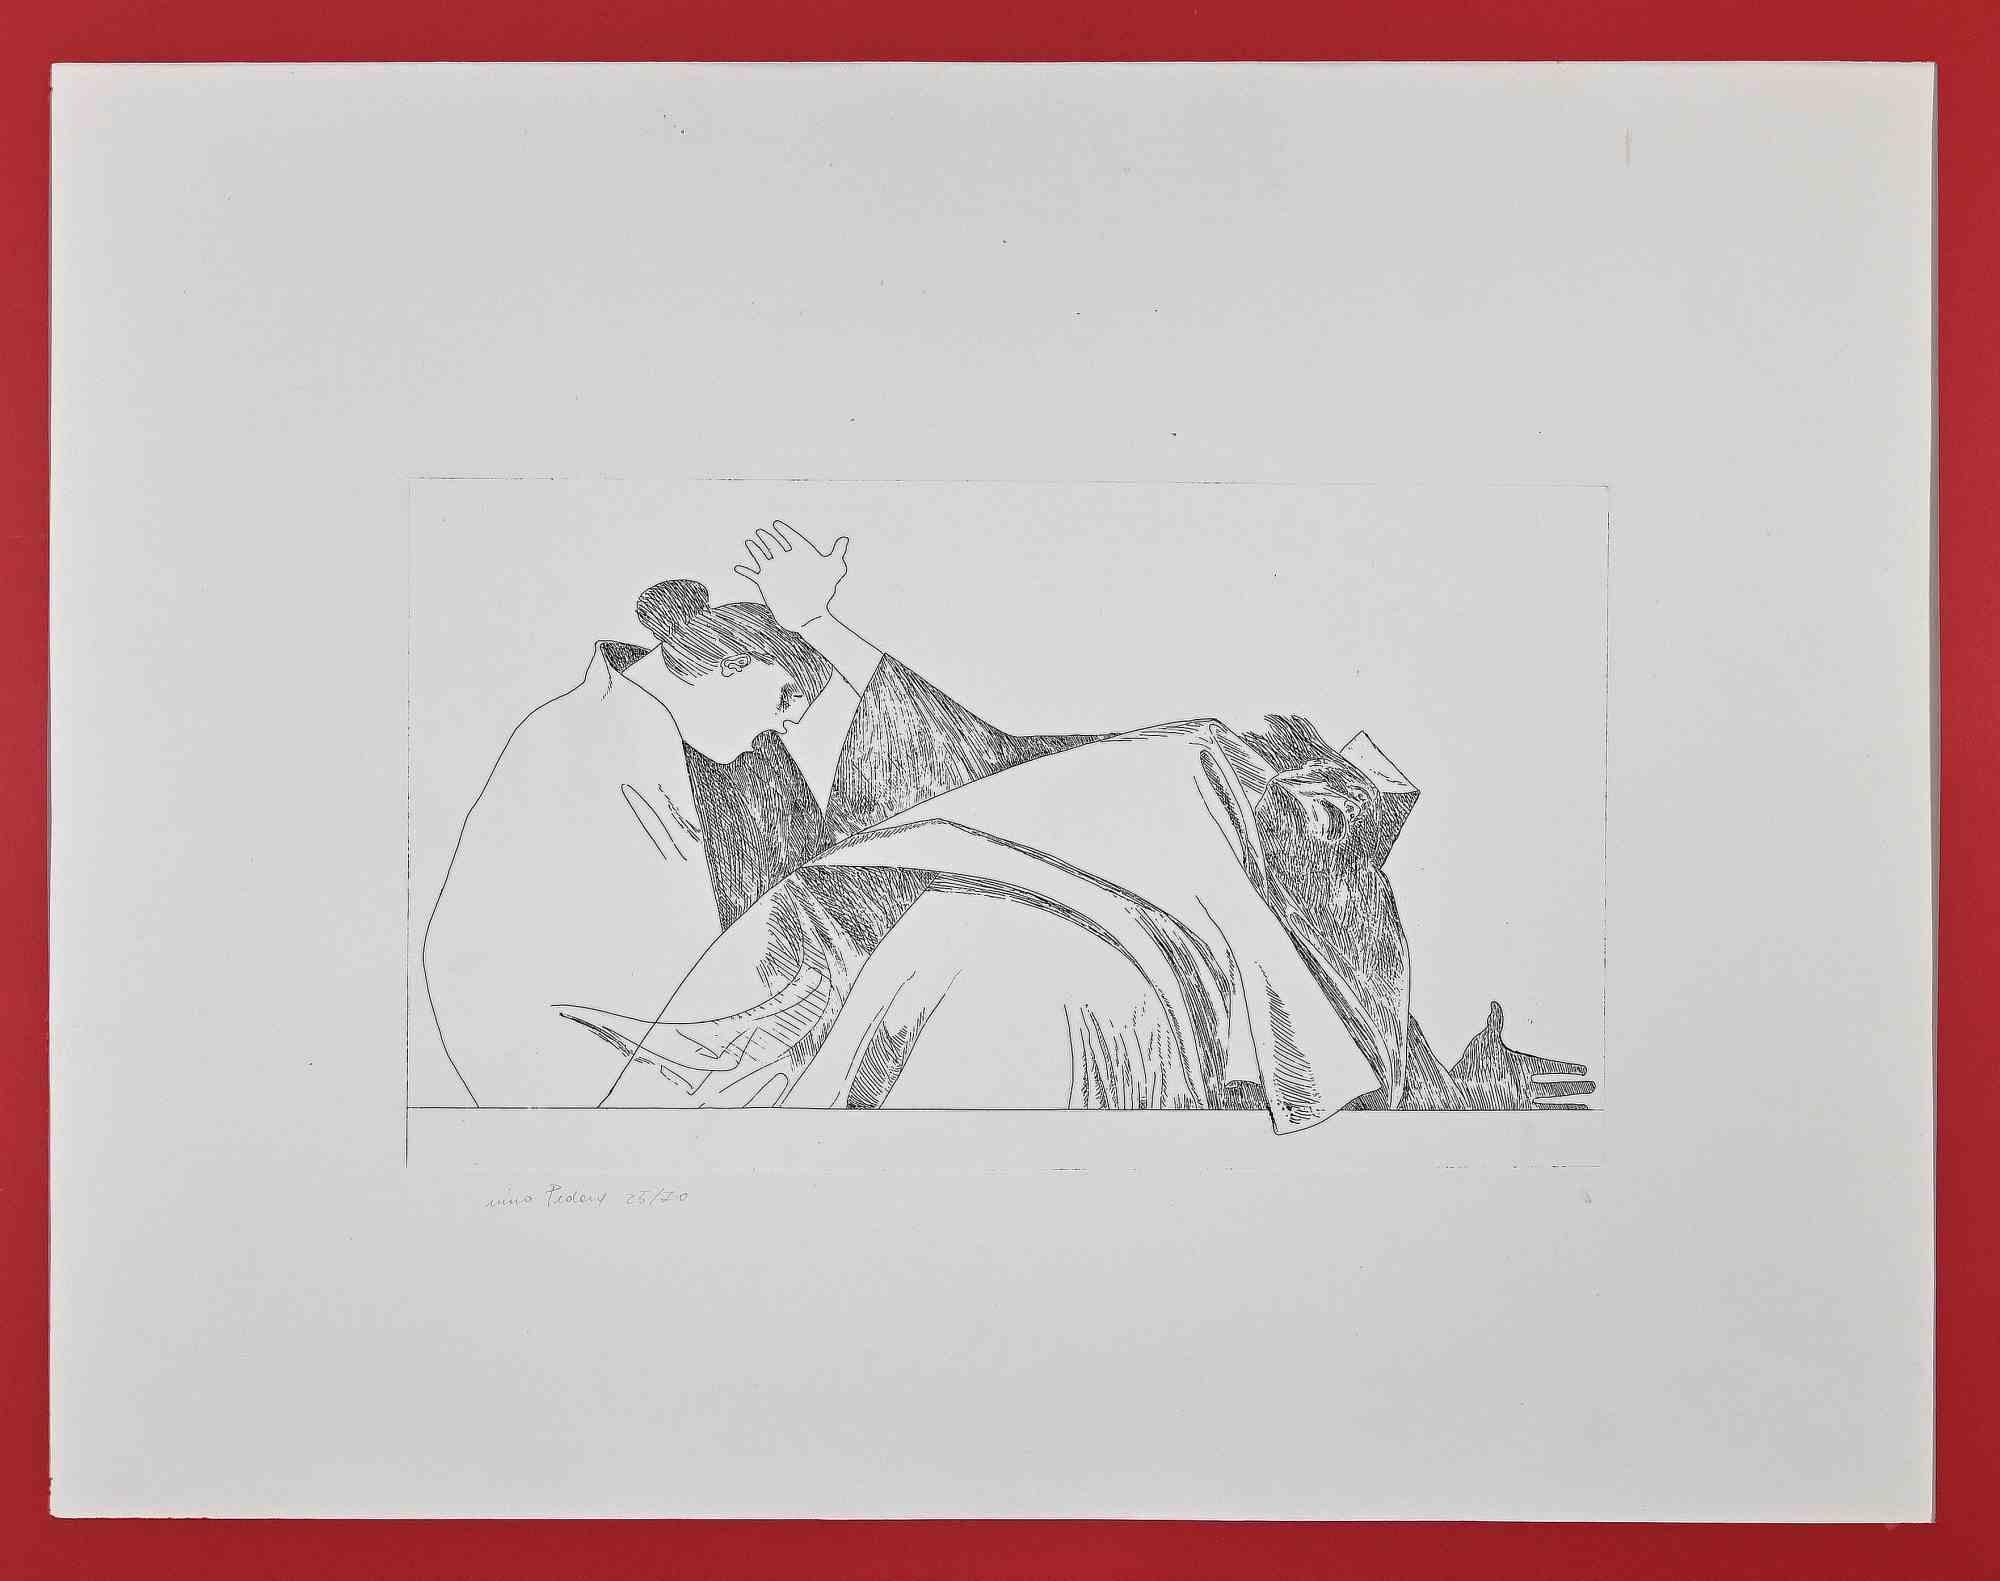 Tragic Composition is an Original etching realized in the 1980s Century by Nino Pedone.

Hand-signed. Numbered, edition,25/70.

Good conditions.

The artwork is depicted through soft strokes in a well-balanced composition.